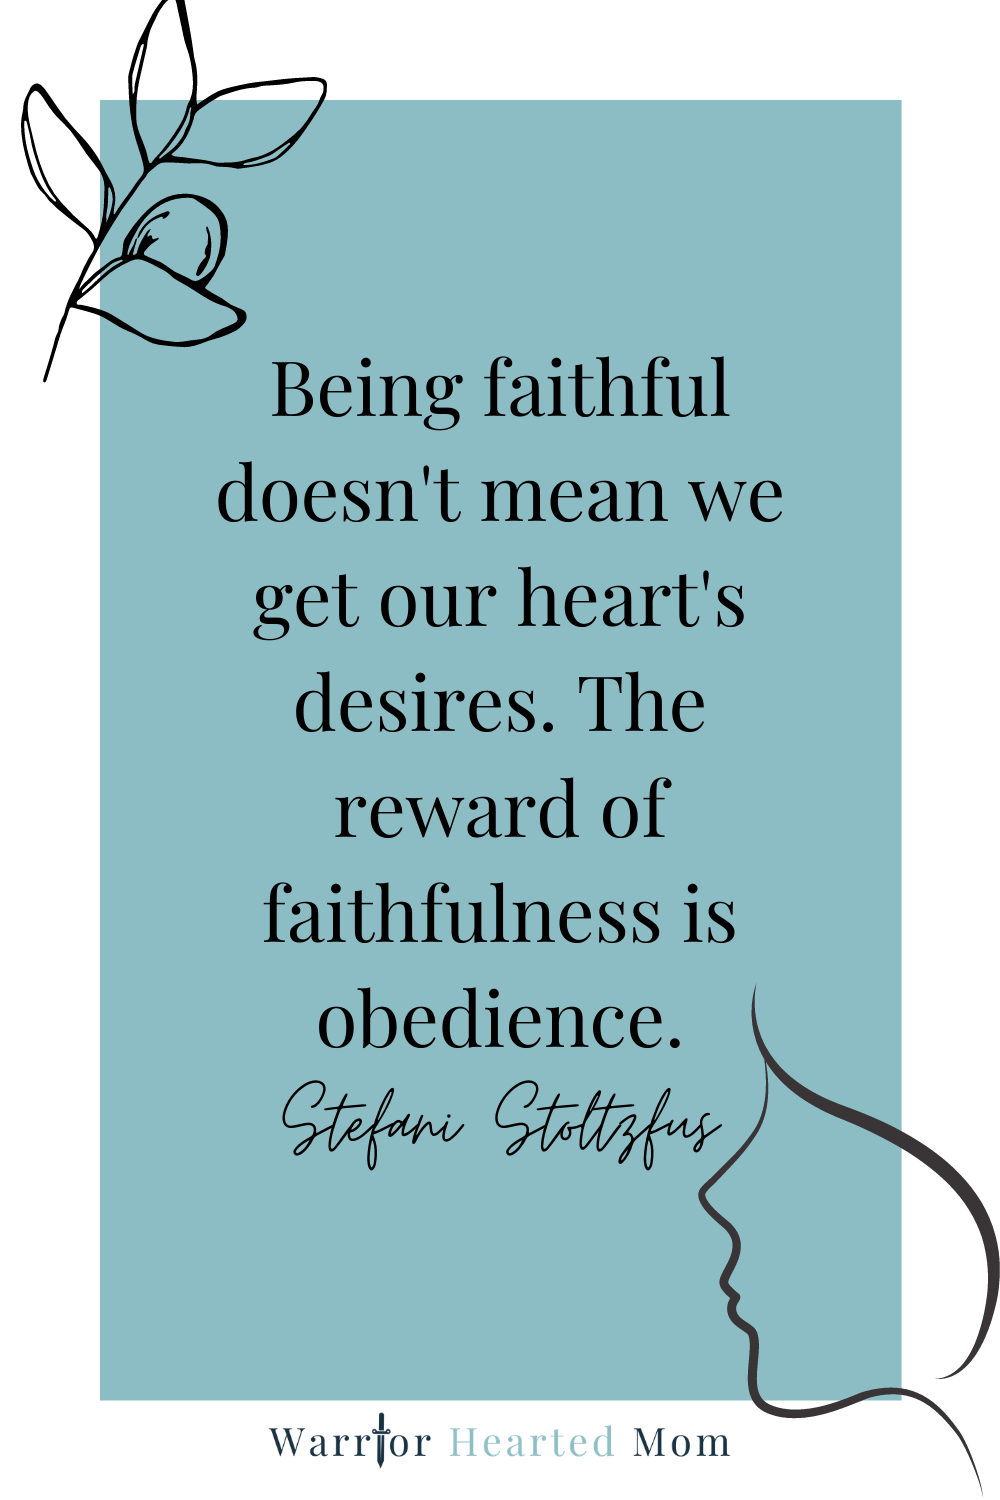 Being faithful doesn't mean we get our heart's desires. The reward of faithfulness is obedience.